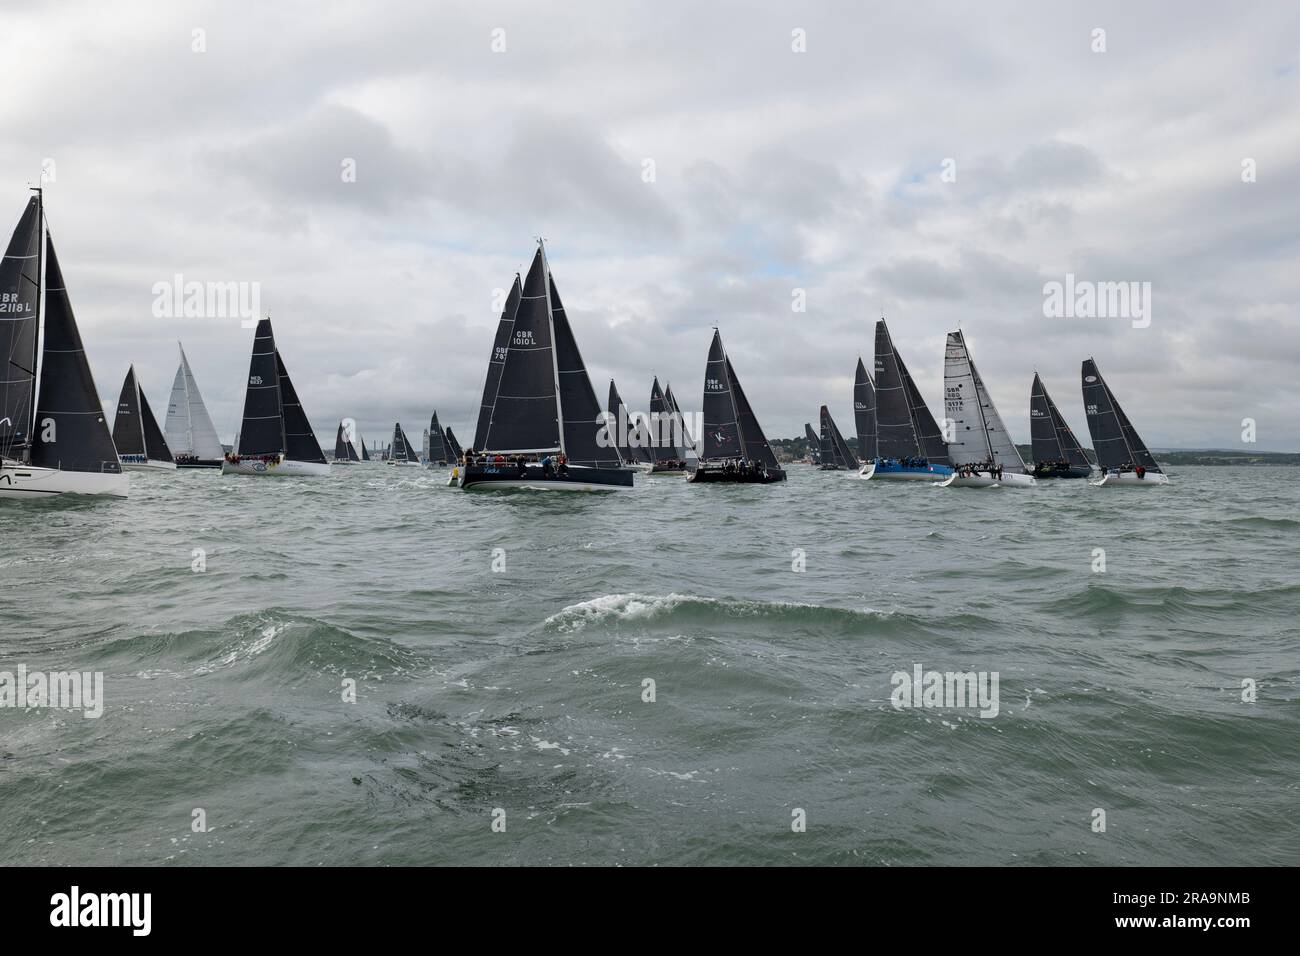 The Yachts are all lined up and ready to start the Isle of Wight Round The Island Sailboat race in the Solent on the South coast of England Stock Photo